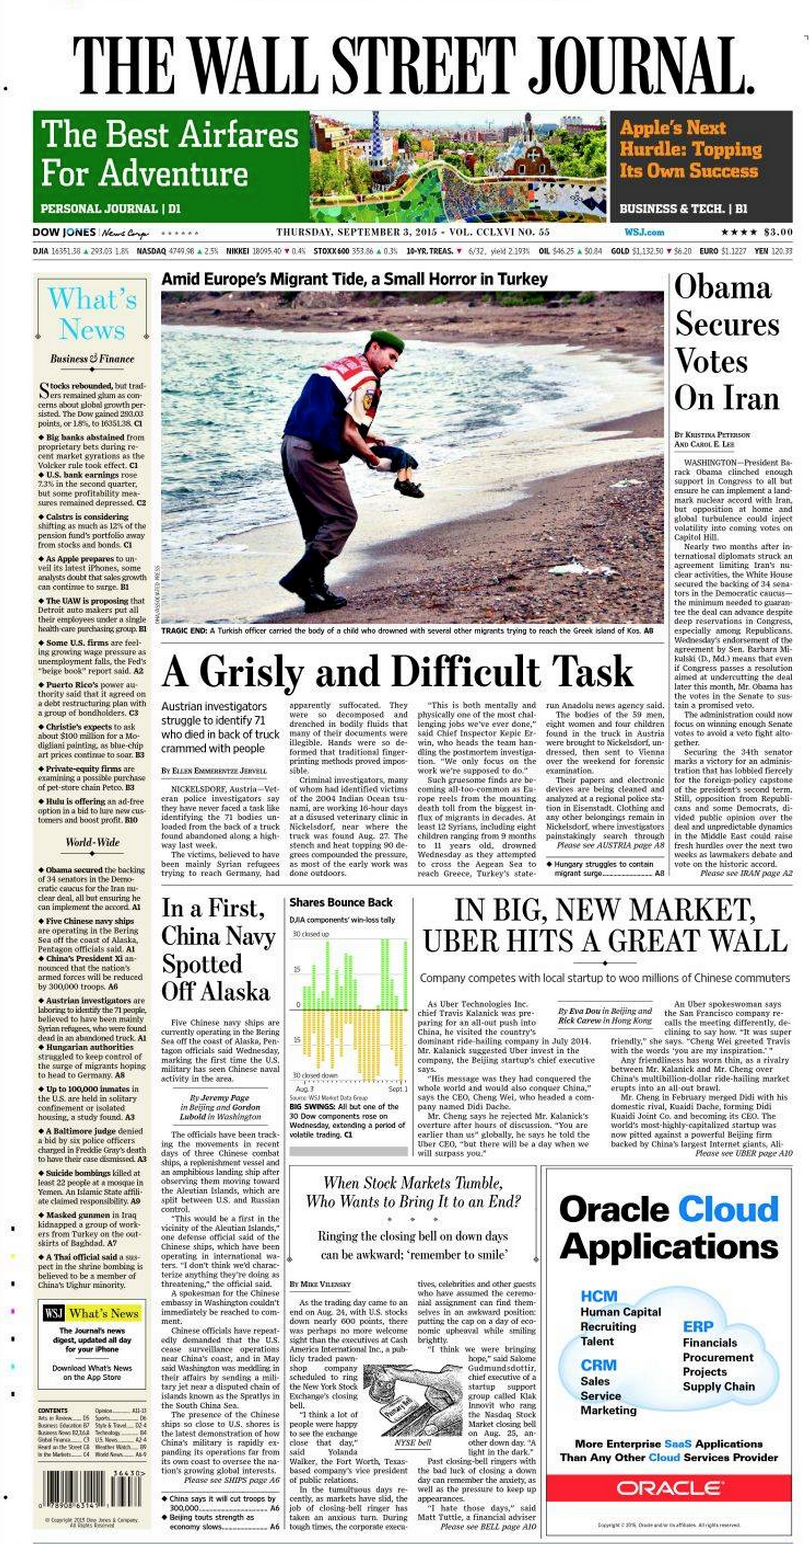 Drowned Migrant Boy The Wall Street Journal front page